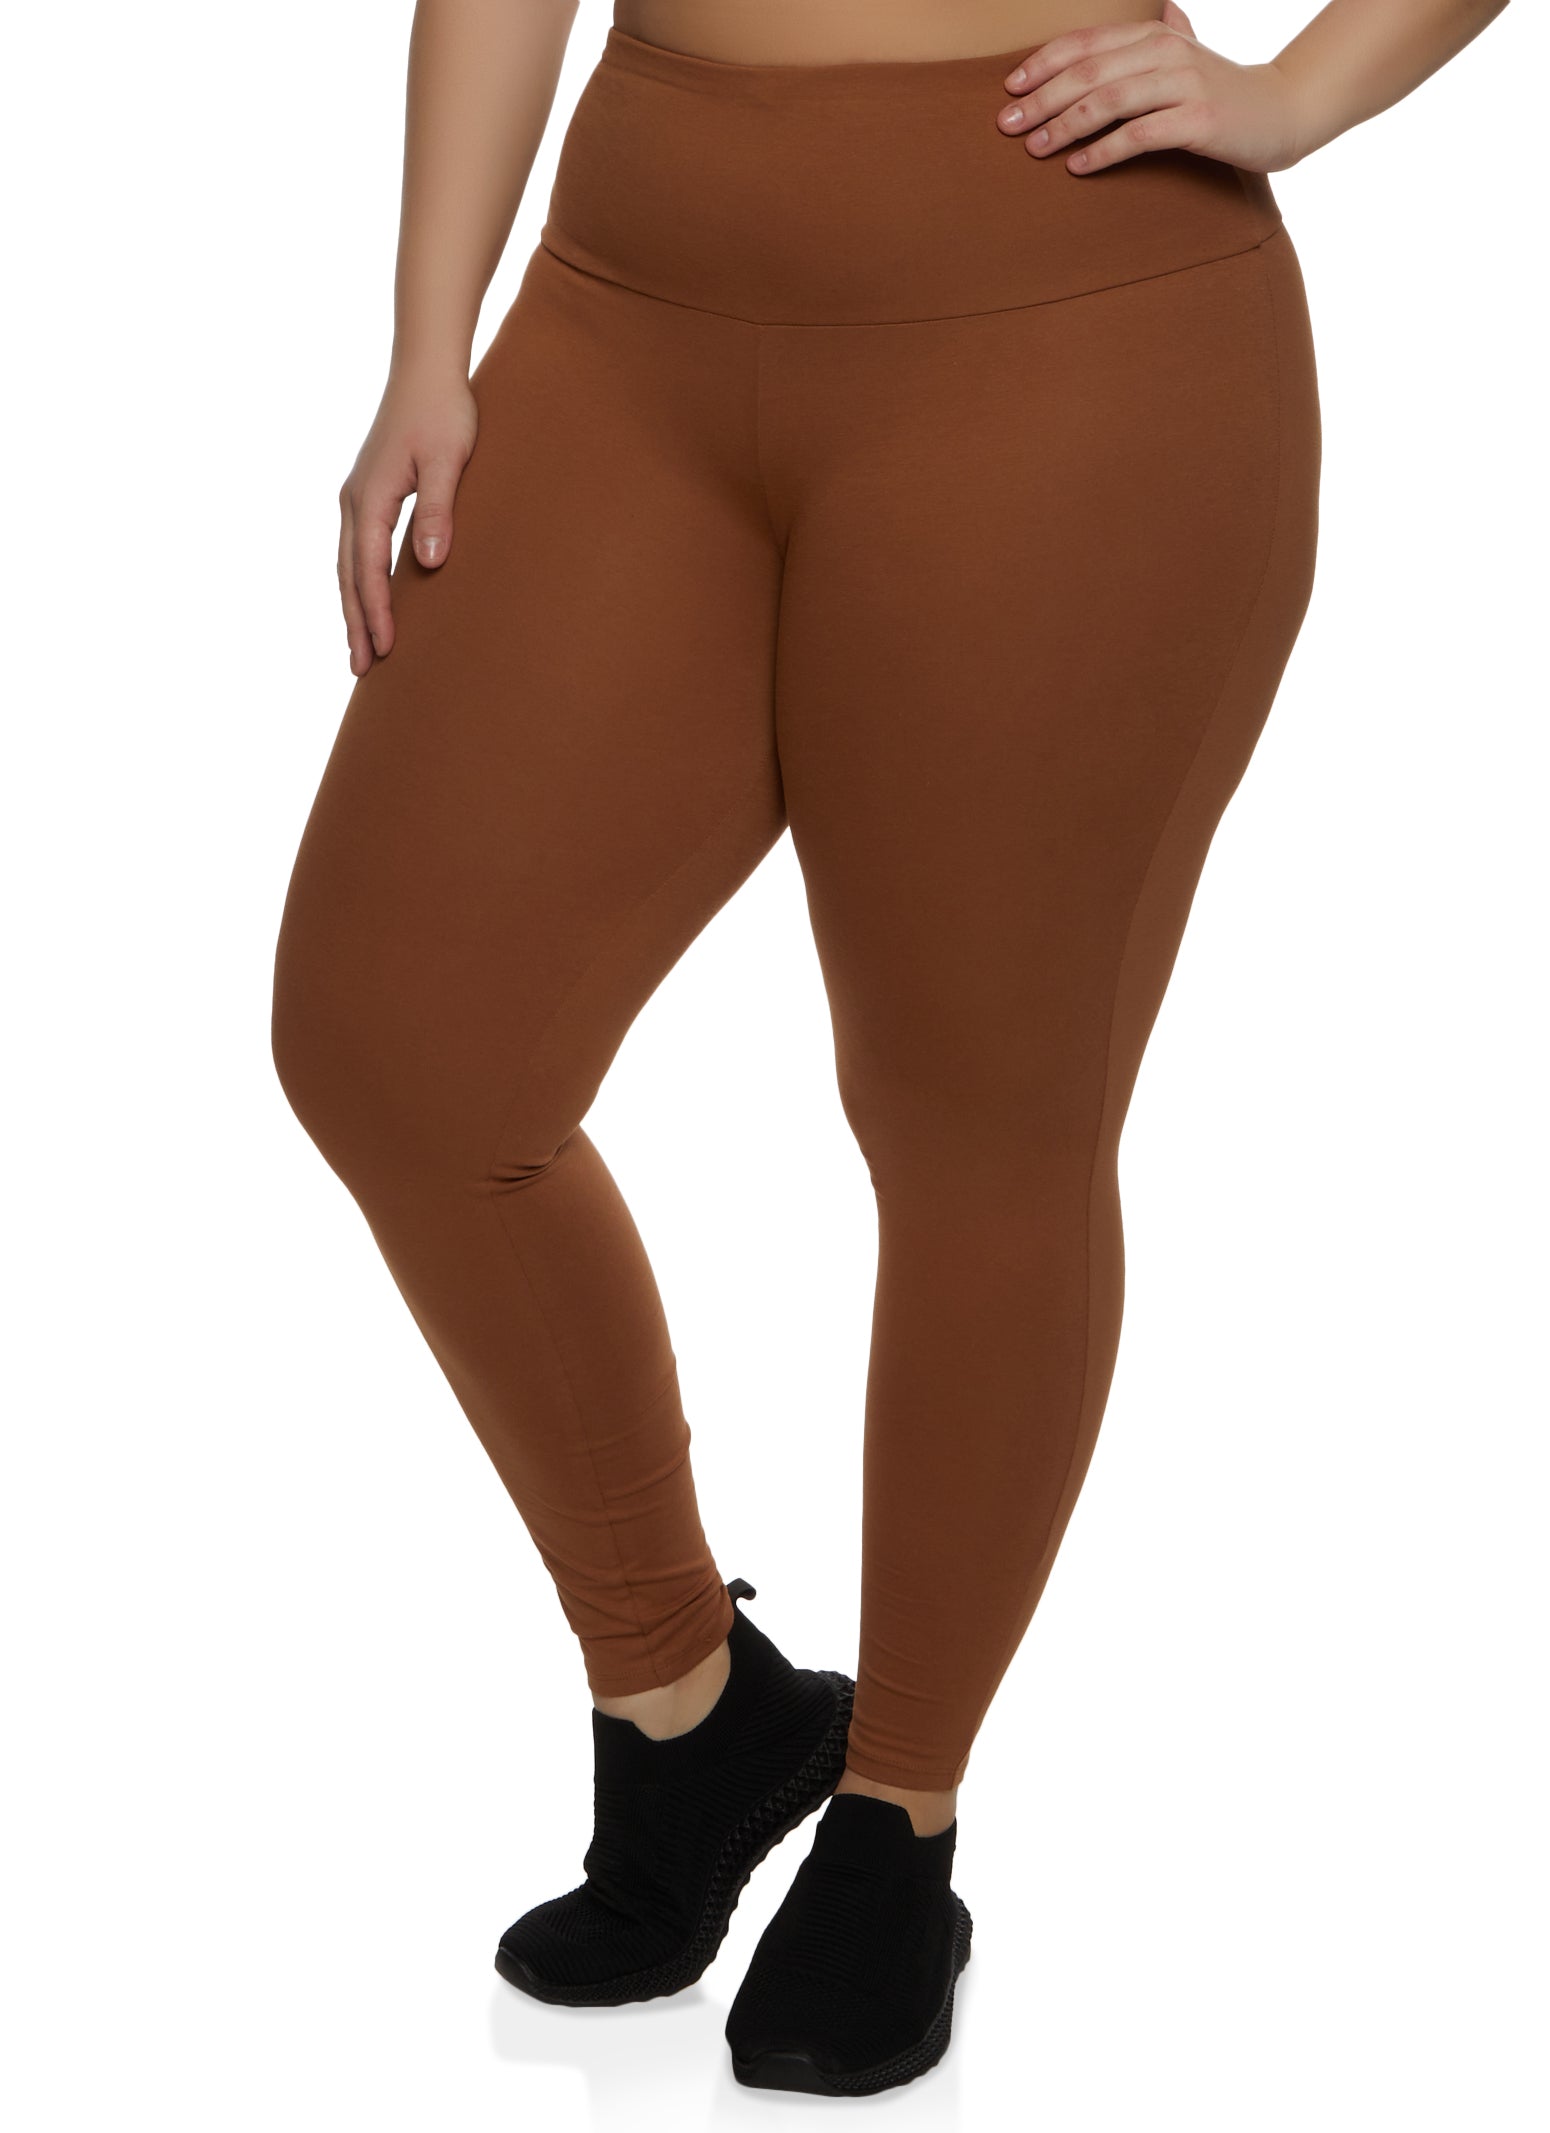 Plus Size Brown Leggings, Everyday Low Prices